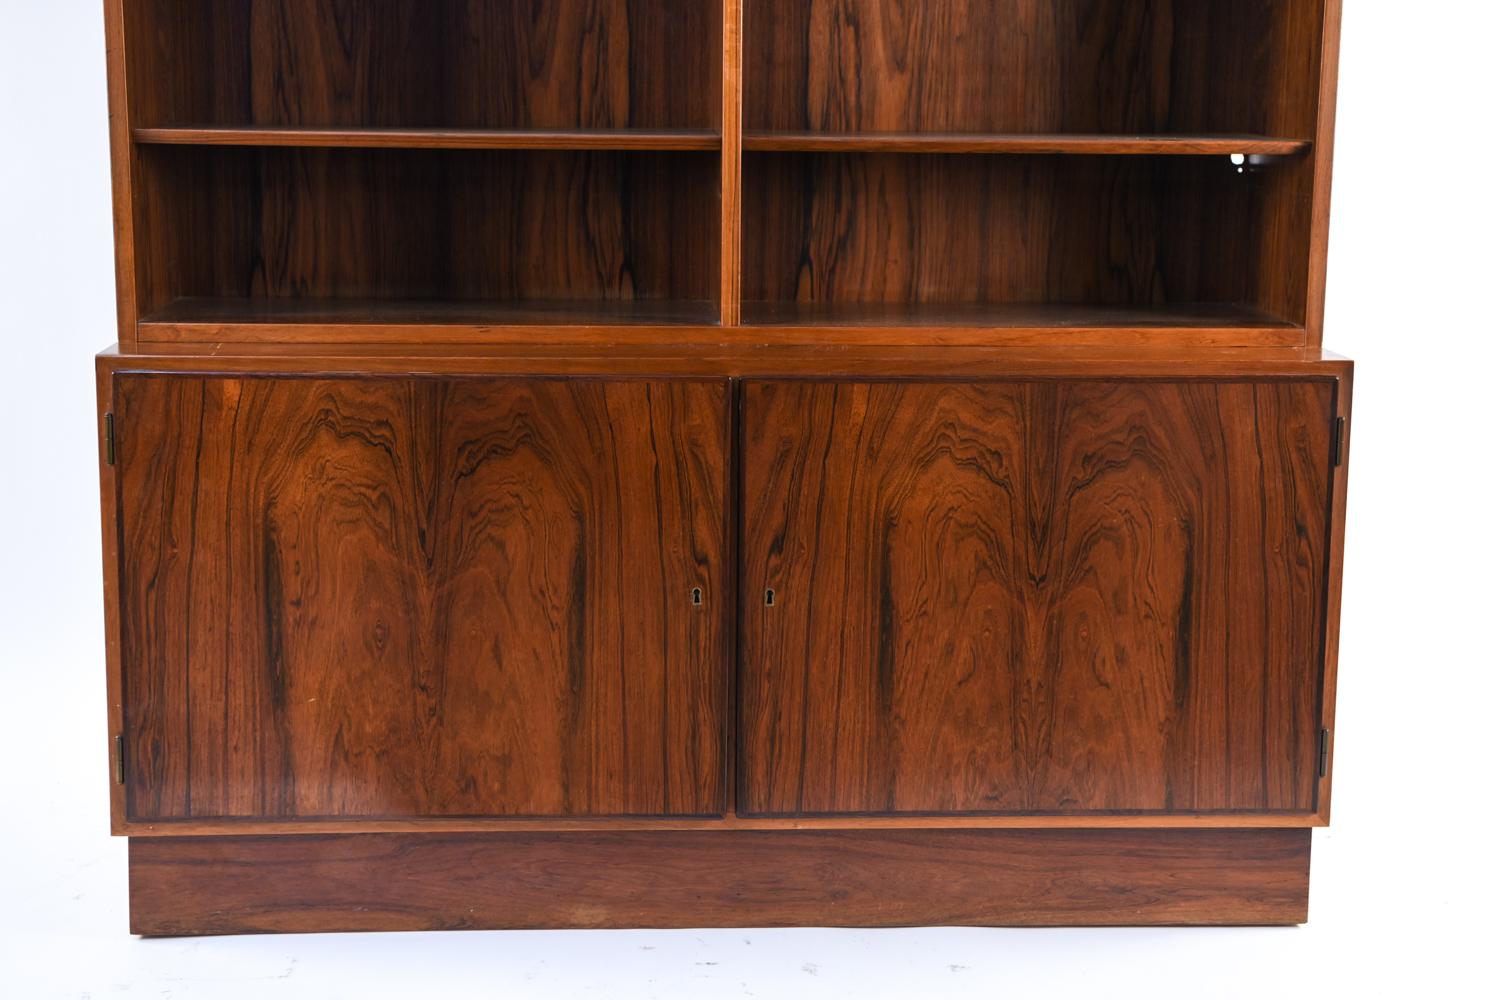 A Danish midcentury wall unit by Omann Jr. A double bookcase sits upon a cabinet beneath providing ample storage, both for display and hidden. This beautiful piece with bookmatched rosewood will be the highlight of any wall.